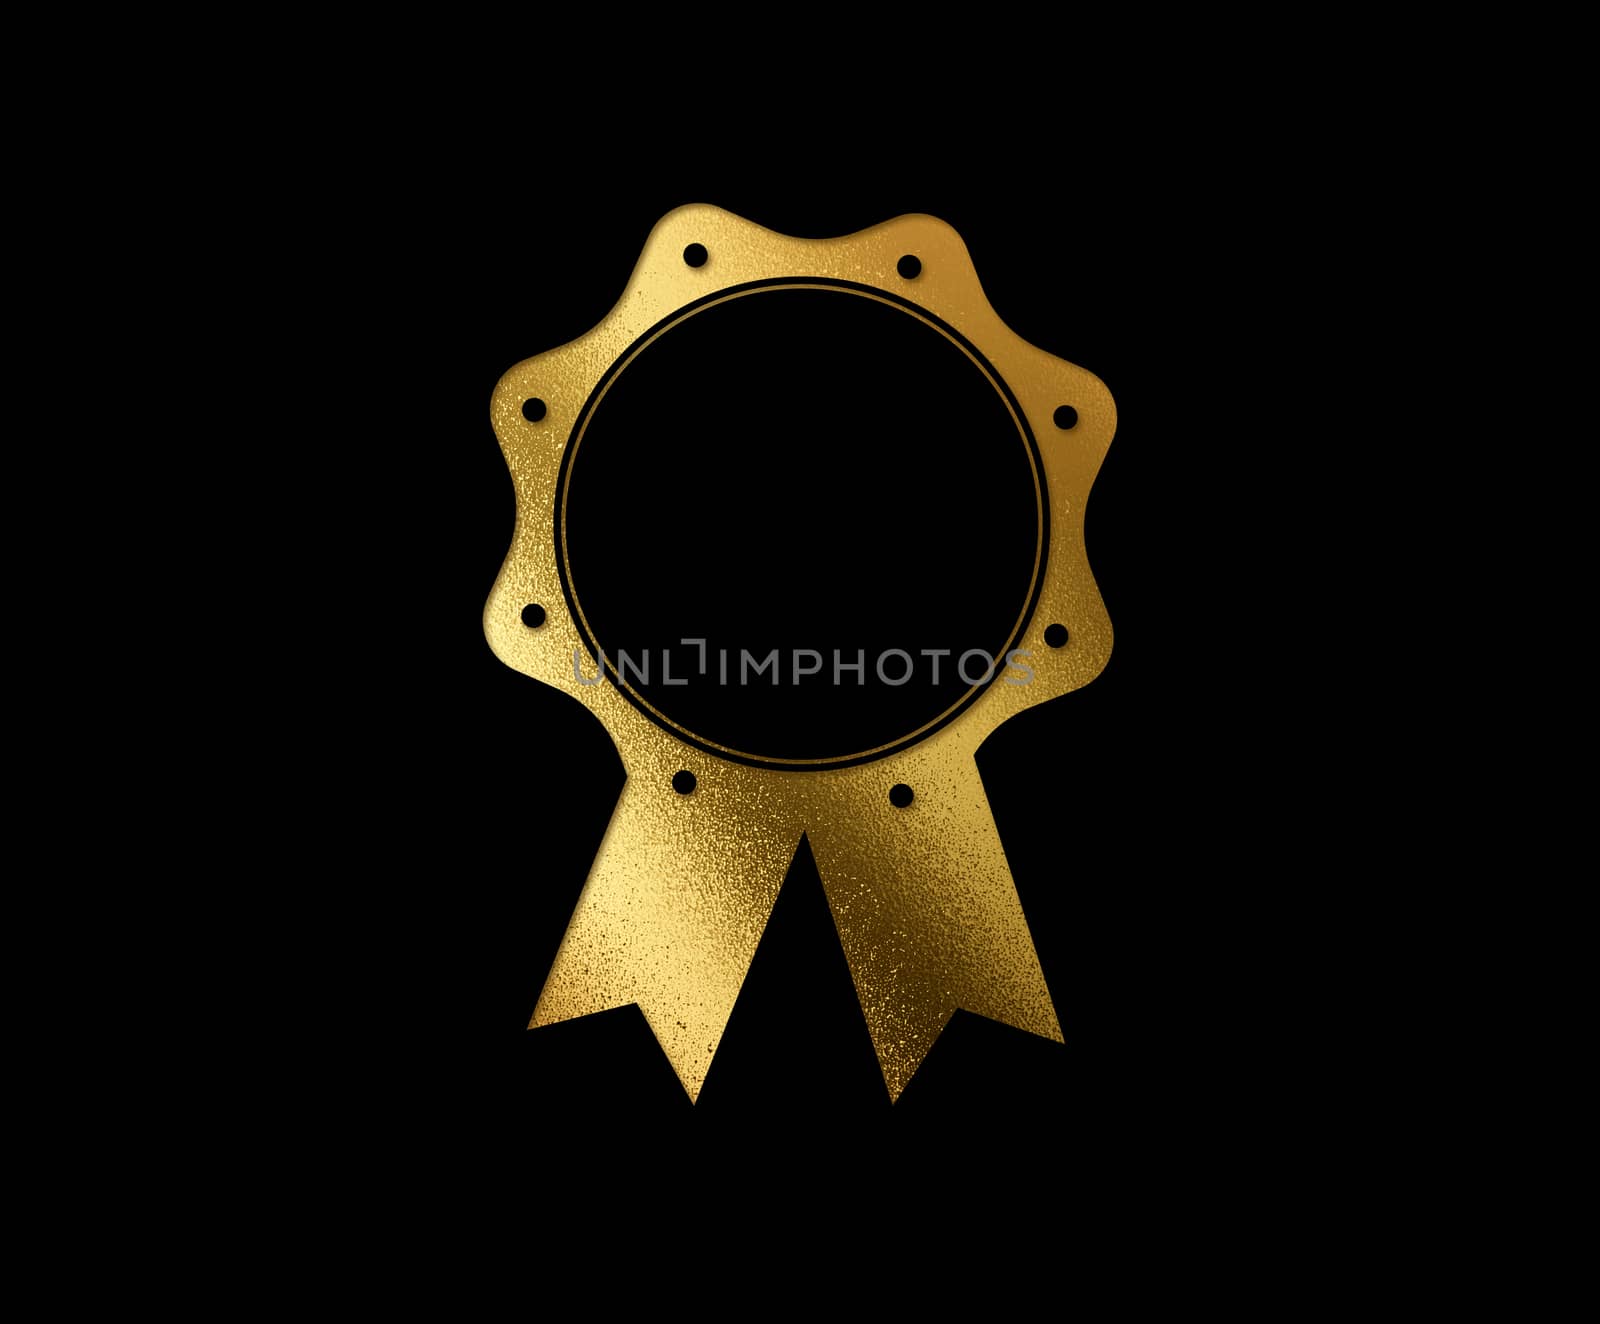 The isolated luxury golden glitter badge flat icon by cougarsan